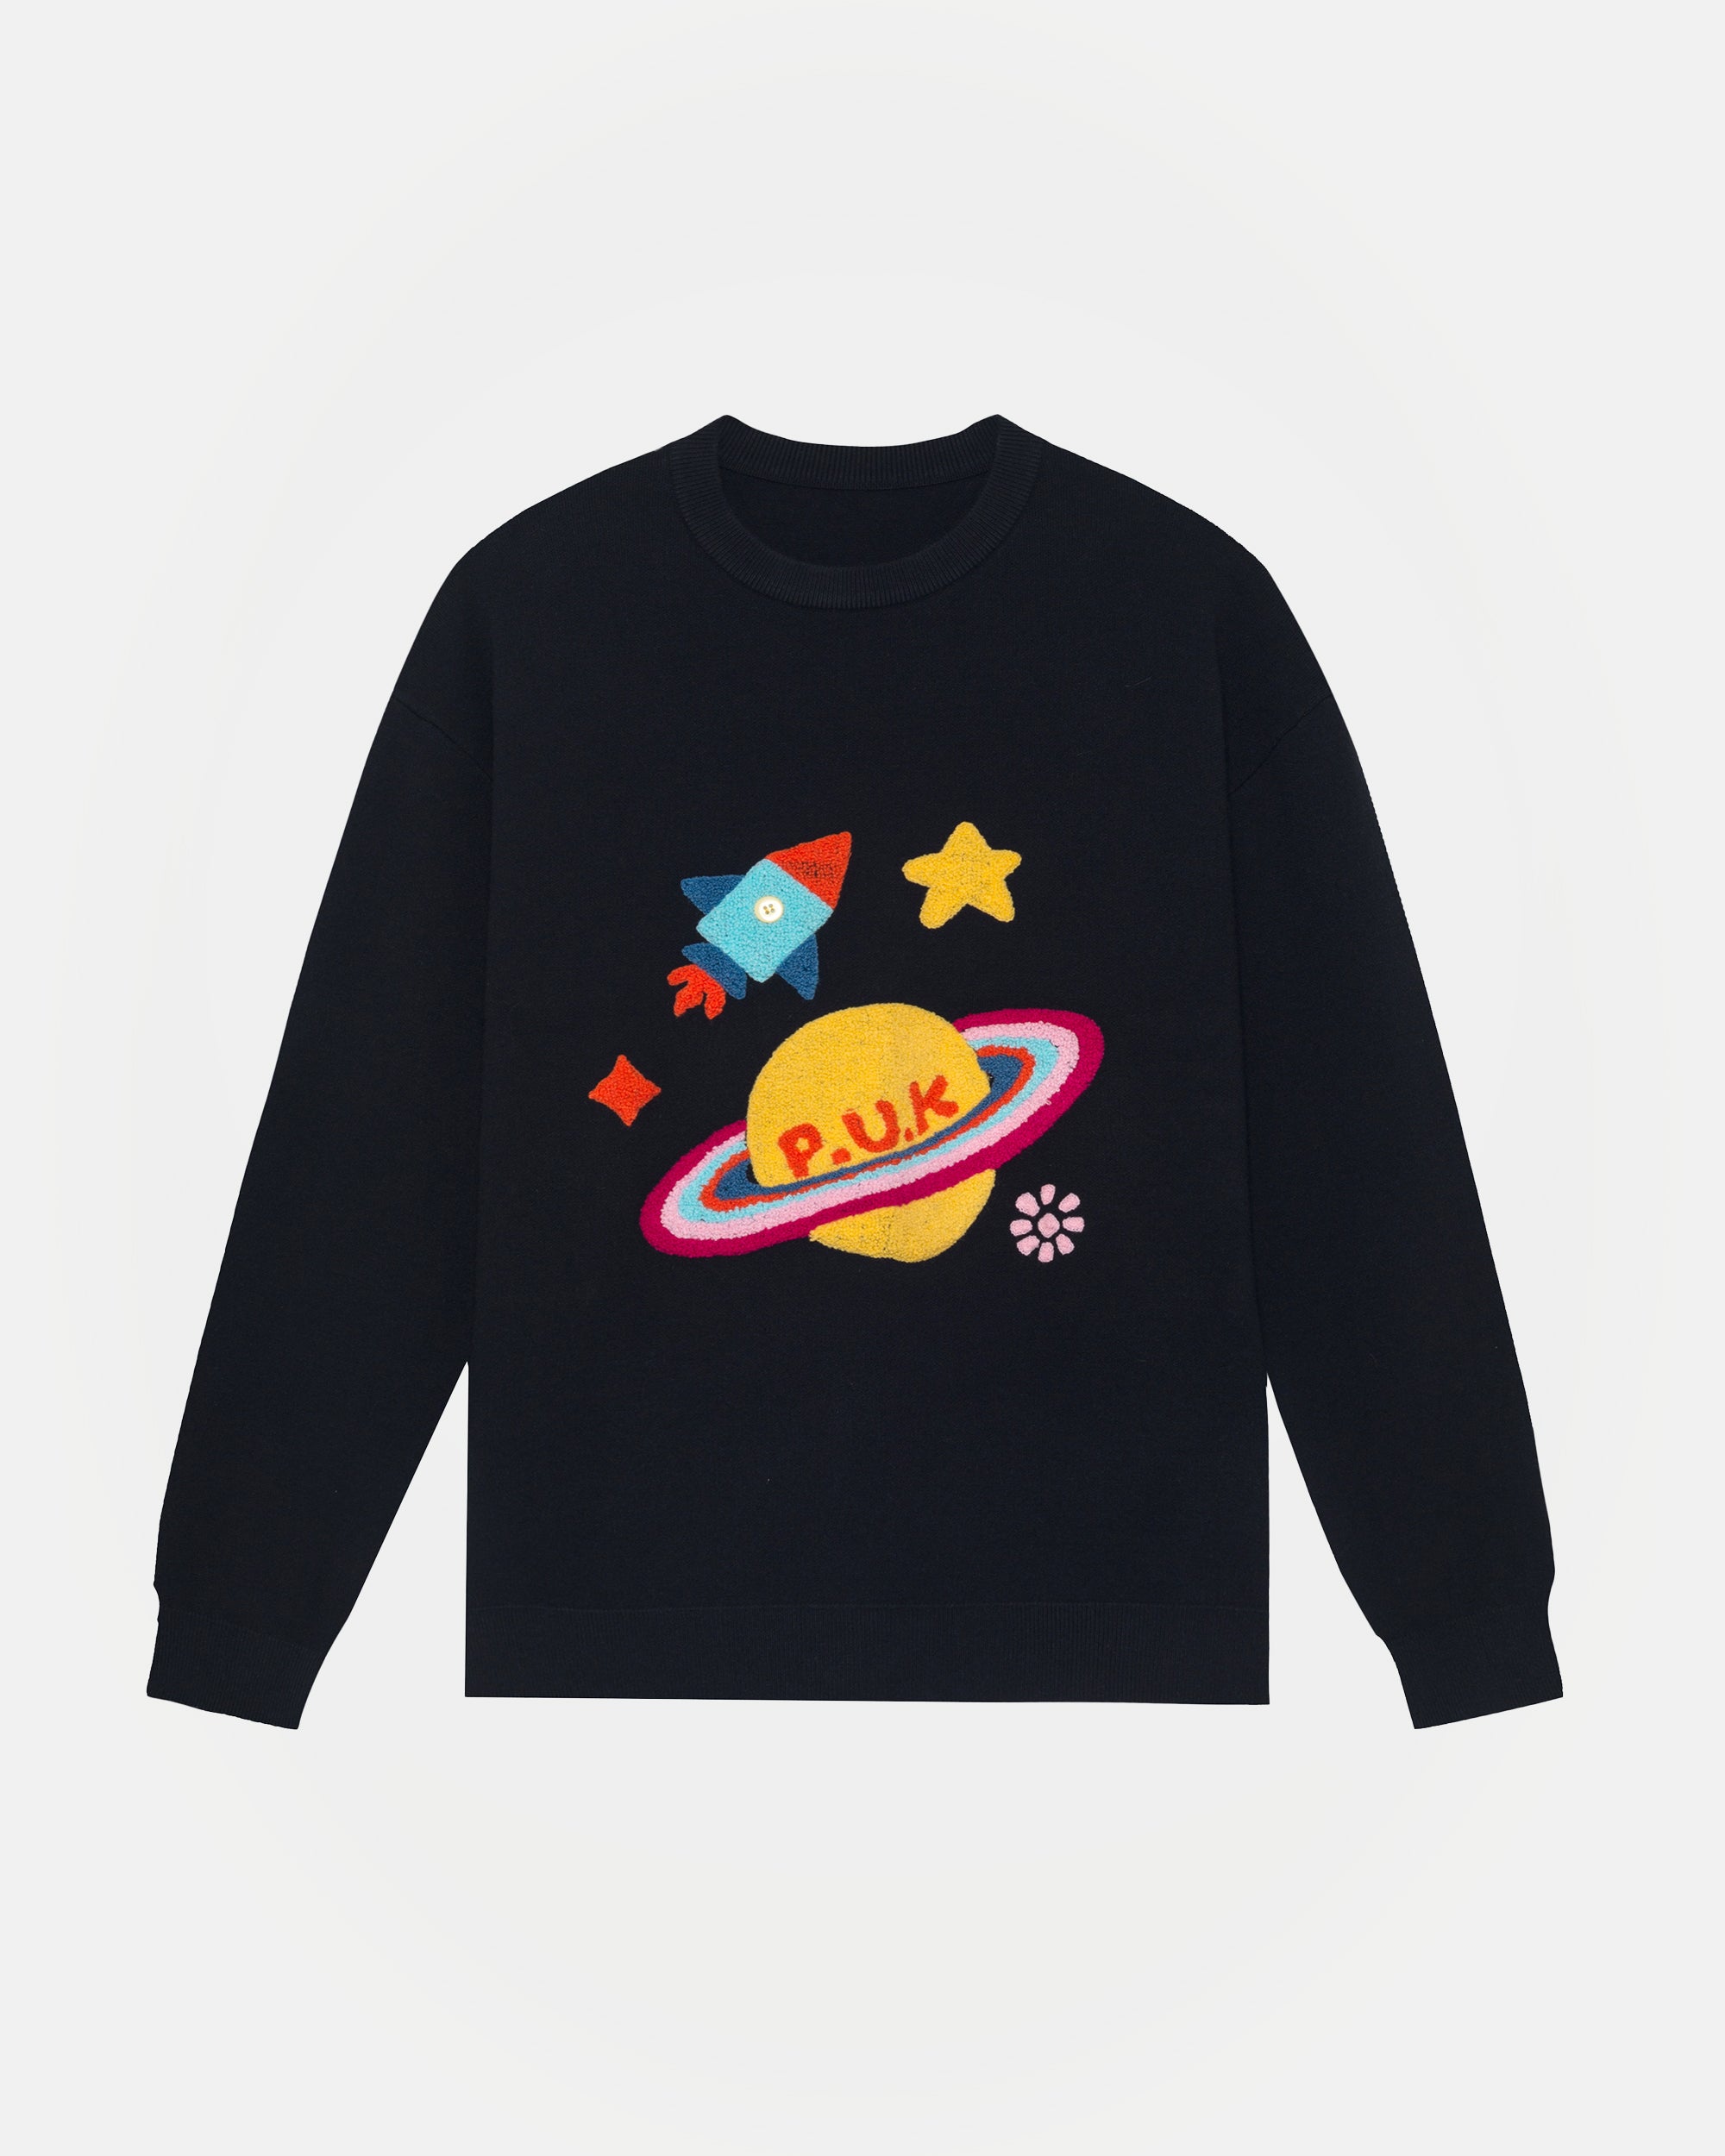 Planet Sweater in Black